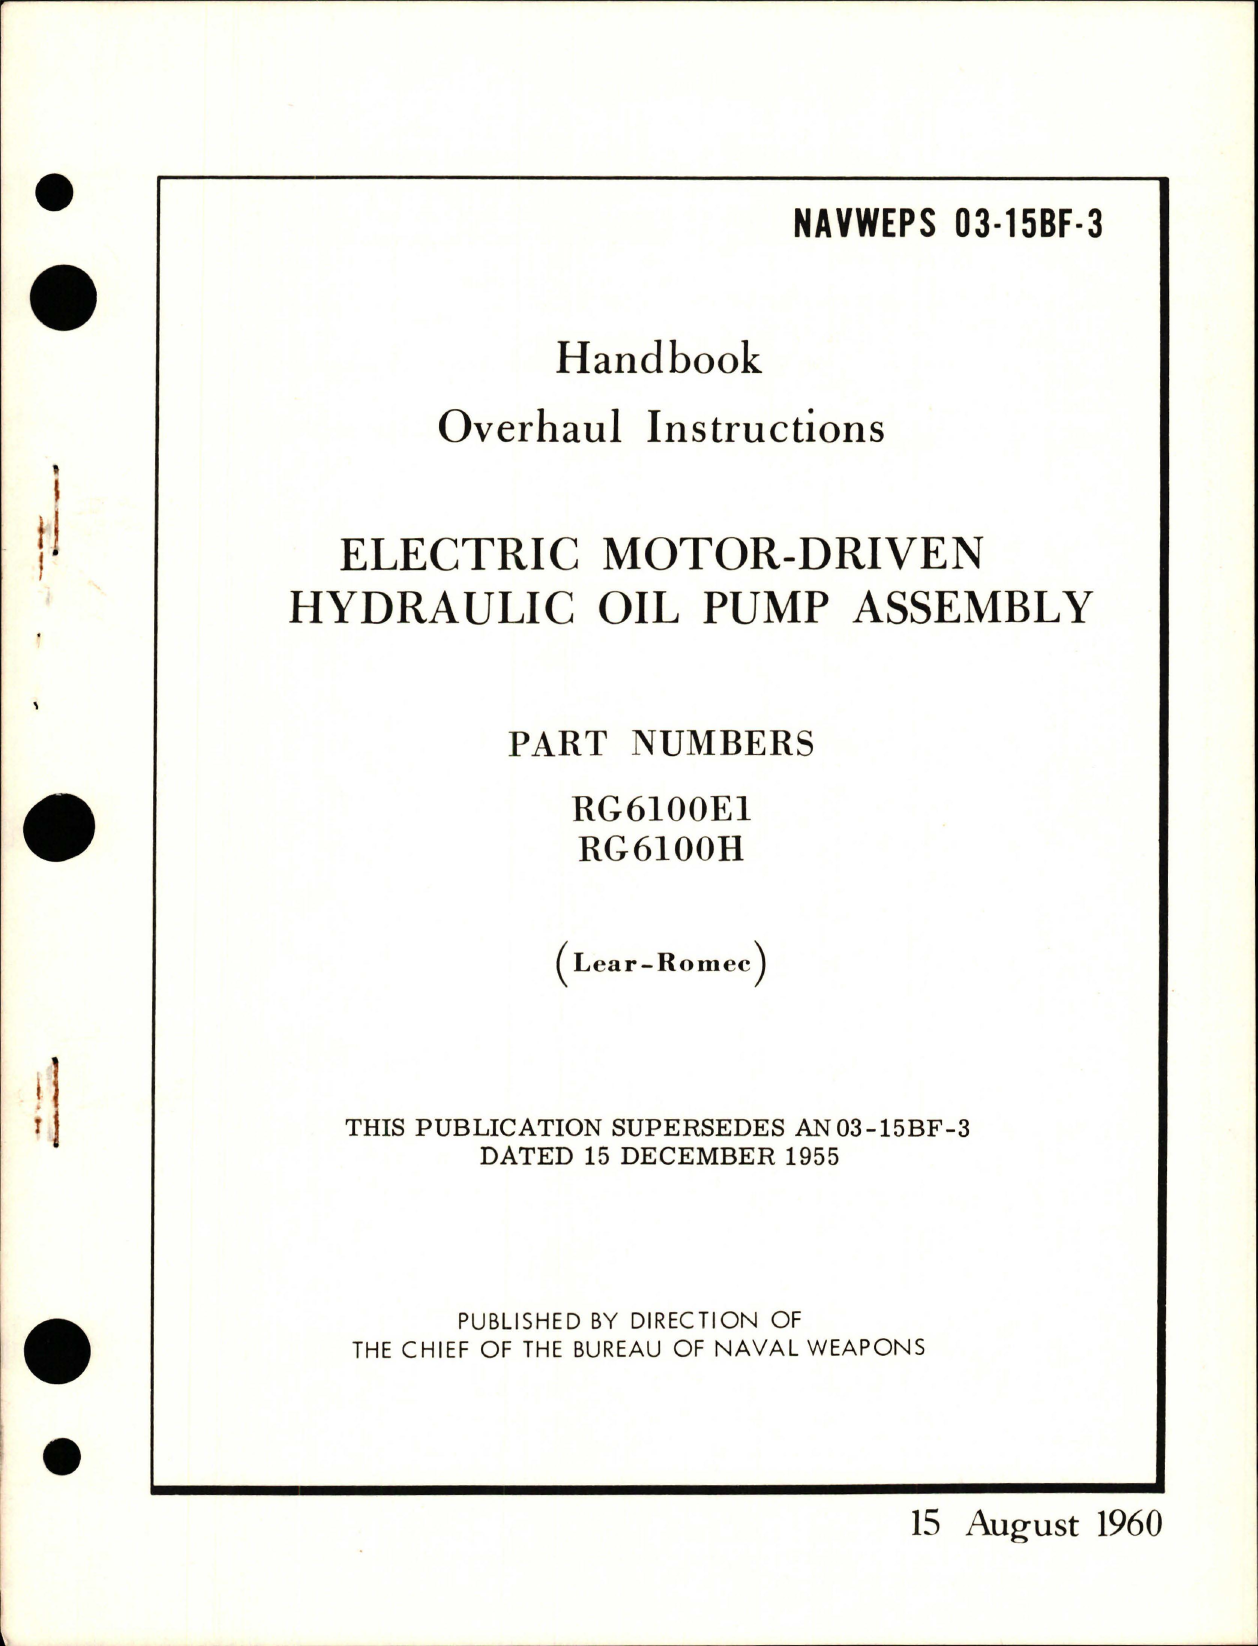 Sample page 1 from AirCorps Library document: Overhaul Instructions for Electric Motor Driven Hydraulic Oil Pump Assembly - Parts RG6100E1 and RG6100H